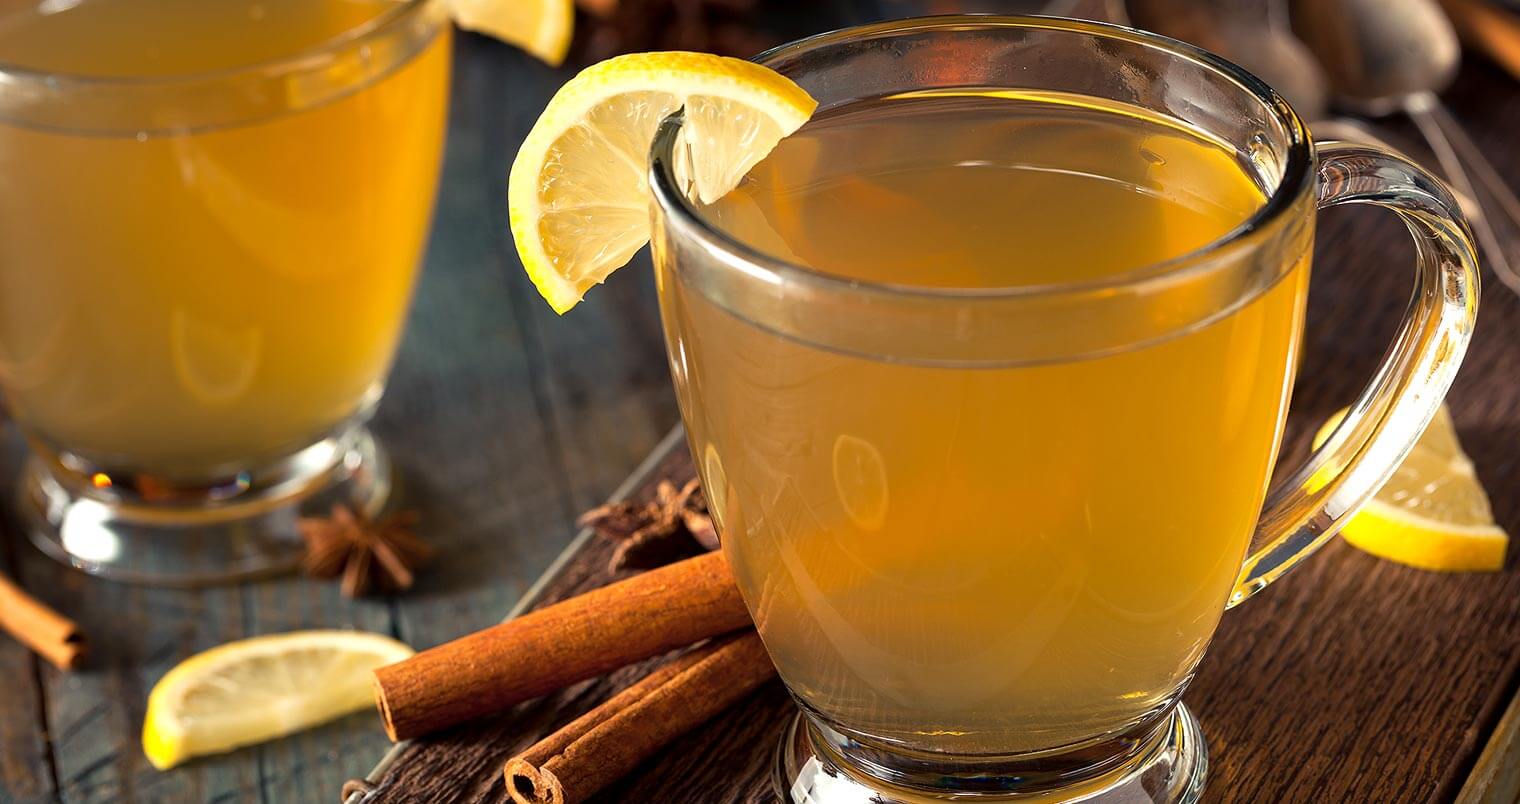 BACARDĺ Rum Hot Toddy, cocktails with cinnamon stick garnish and lemon, featured image